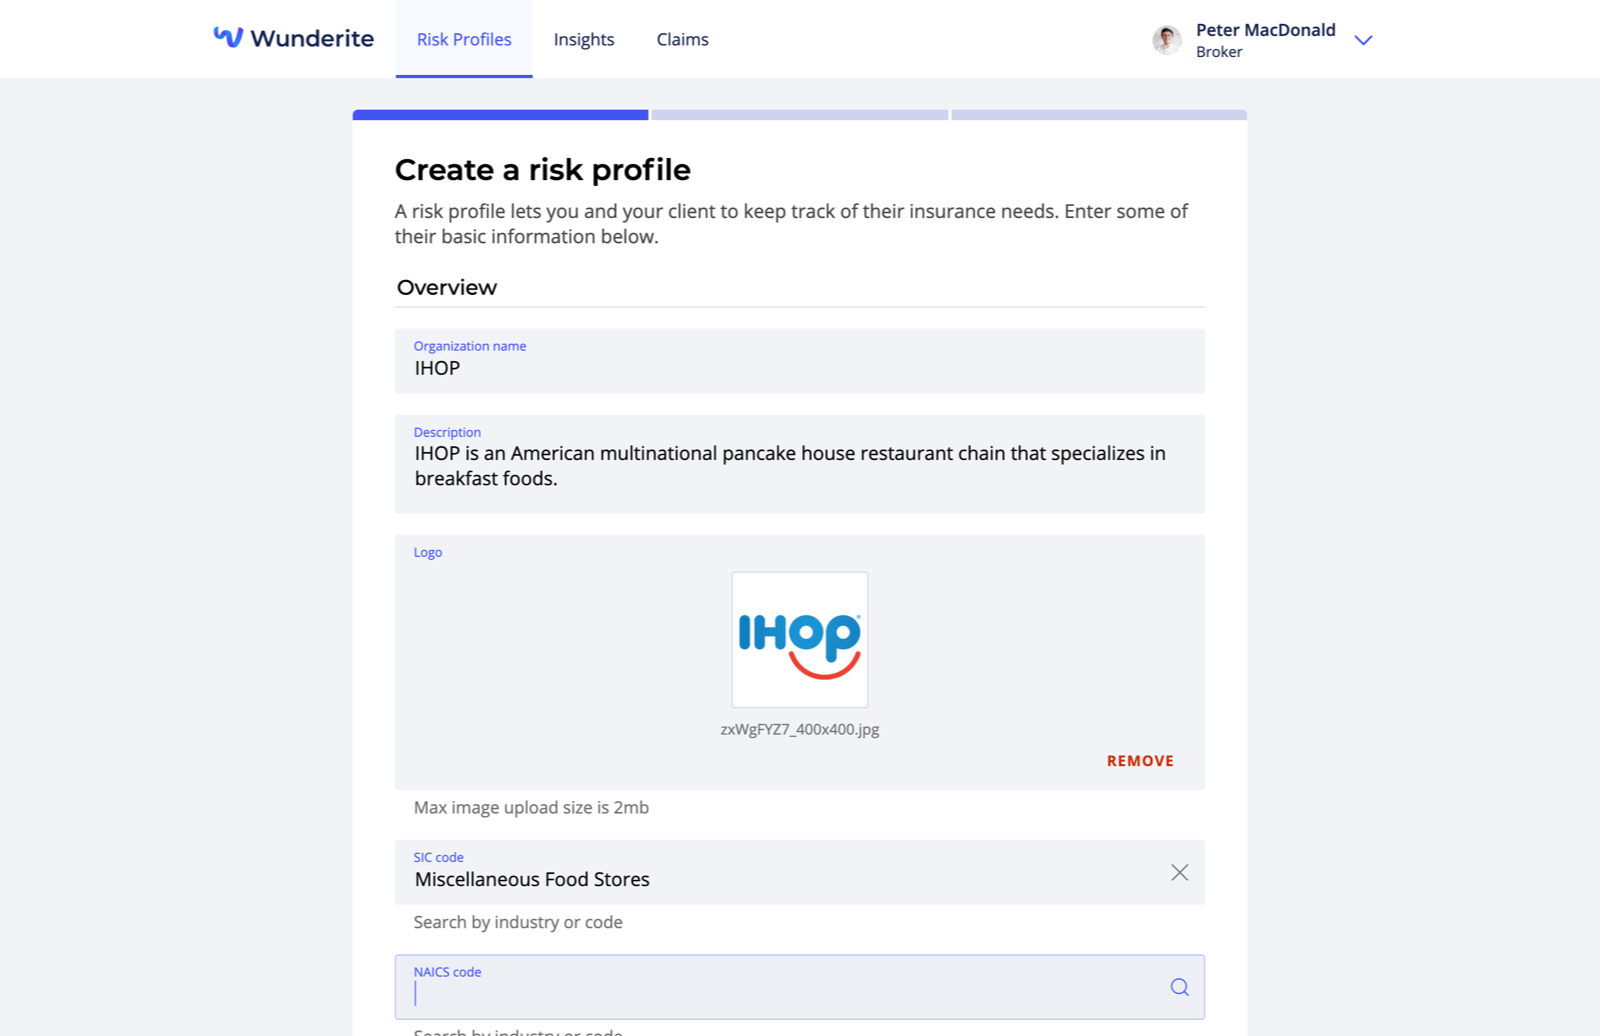 A form for creating a new profile. The fields are organization name (filled "IHOP"), description (filled "IHOP is an American multinational pancake house restaurant chain that specializes in breakfast foods"), logo (filled with IHOP's logo), SIC code (filled "Miscellaneous Food Stores"), and NAICS code (which is currently focused).